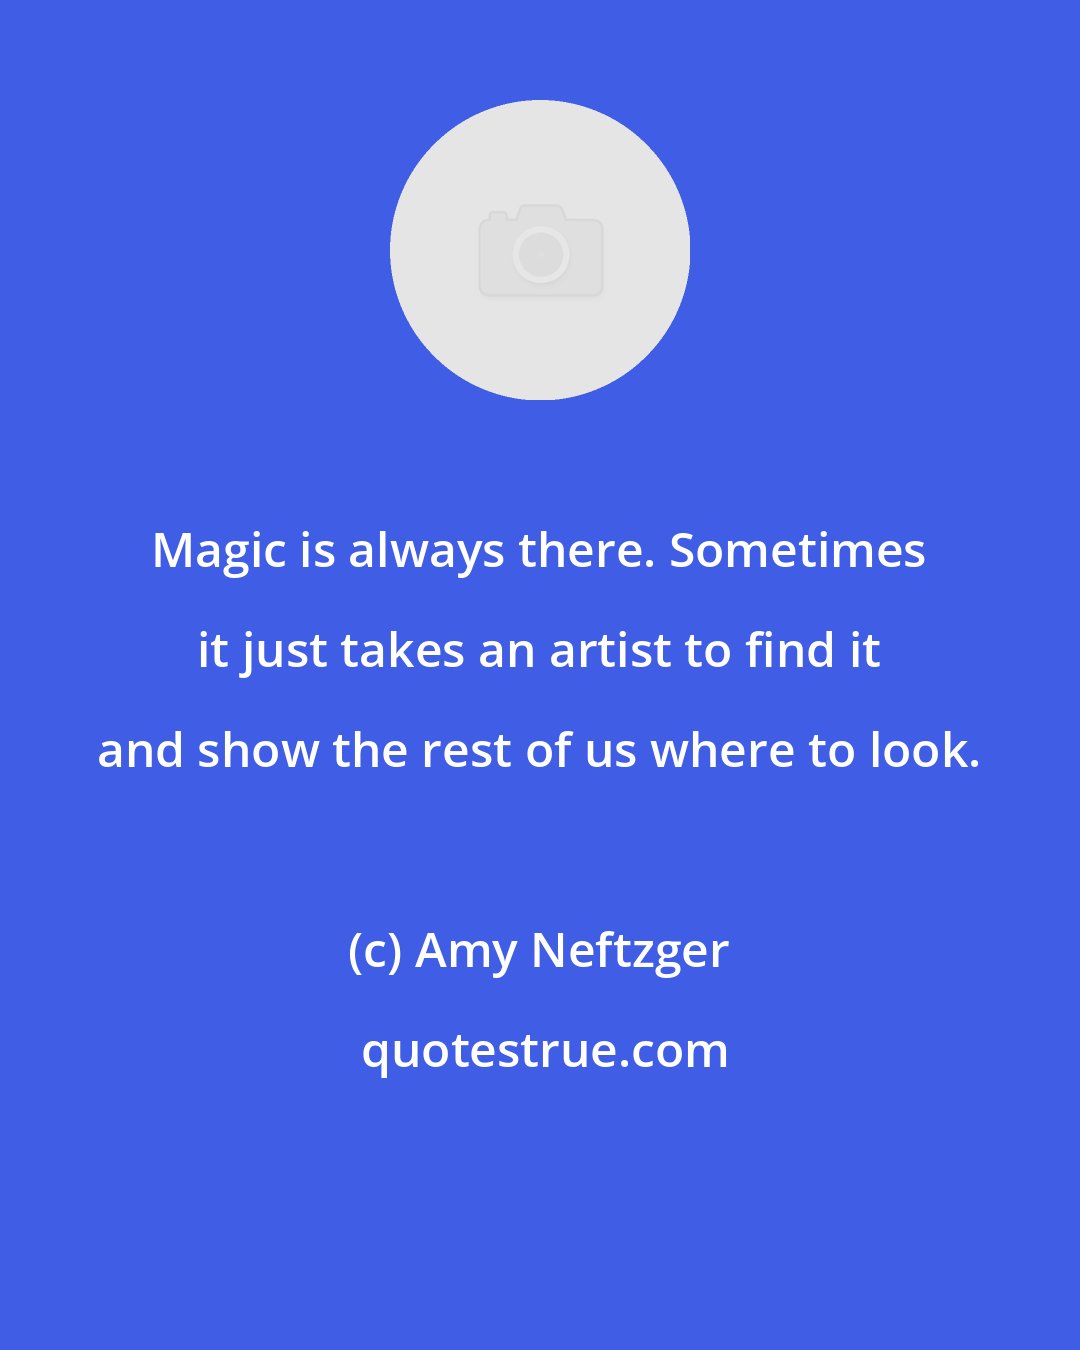 Amy Neftzger: Magic is always there. Sometimes it just takes an artist to find it and show the rest of us where to look.